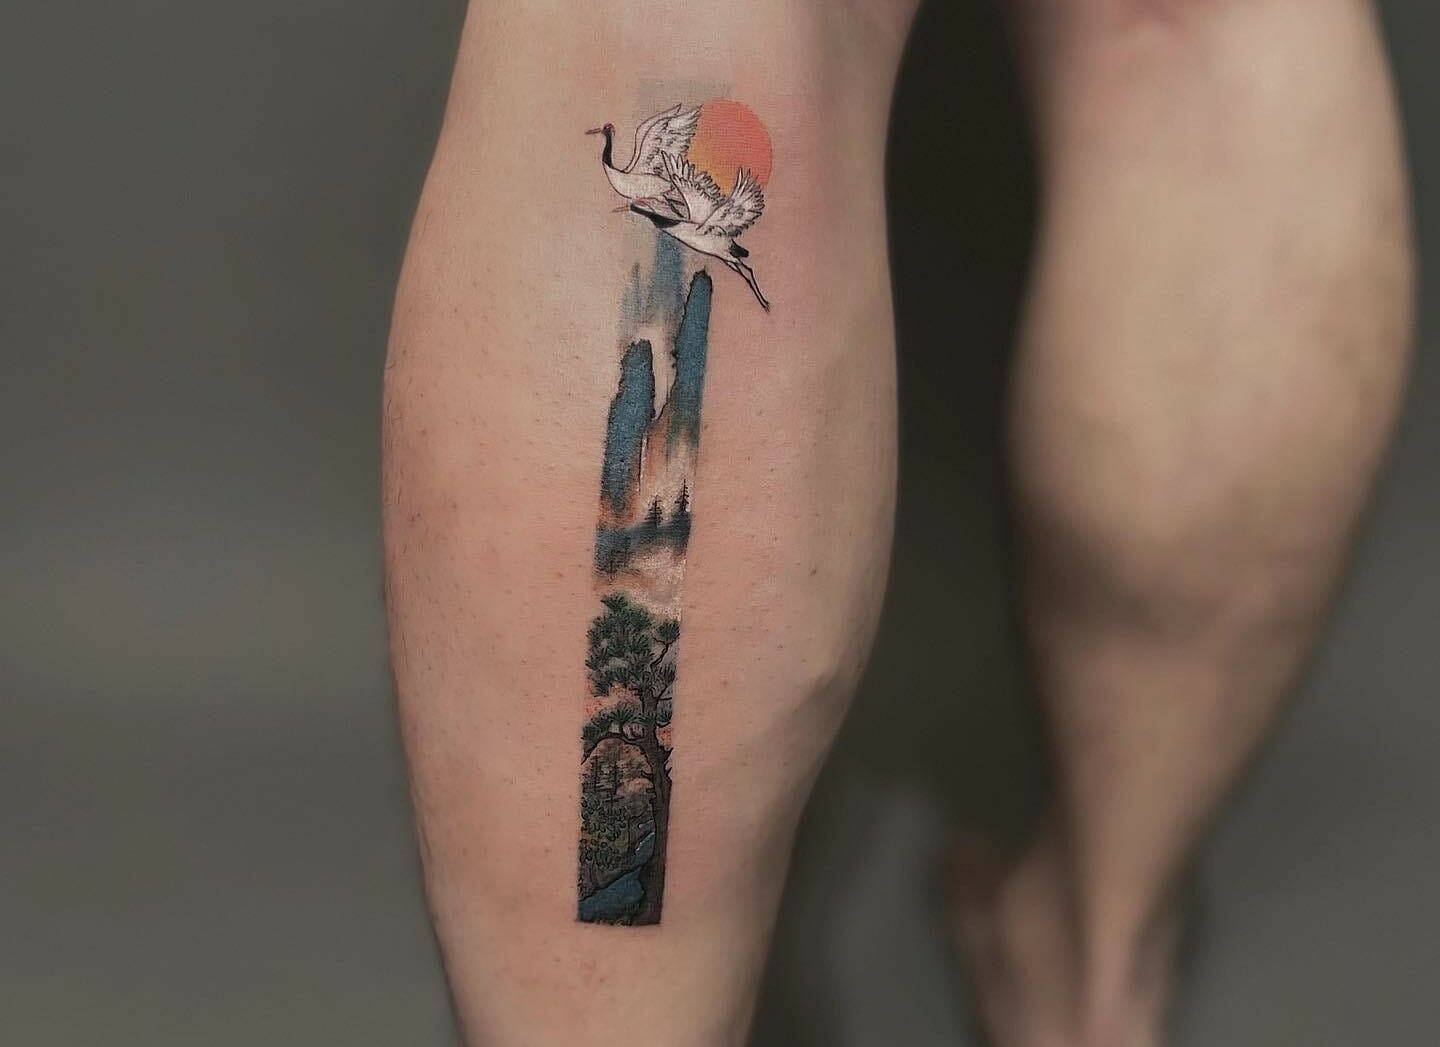 10+ Mens Calf Tattoo Ideas That Will Blow Your Mind! - Alexie